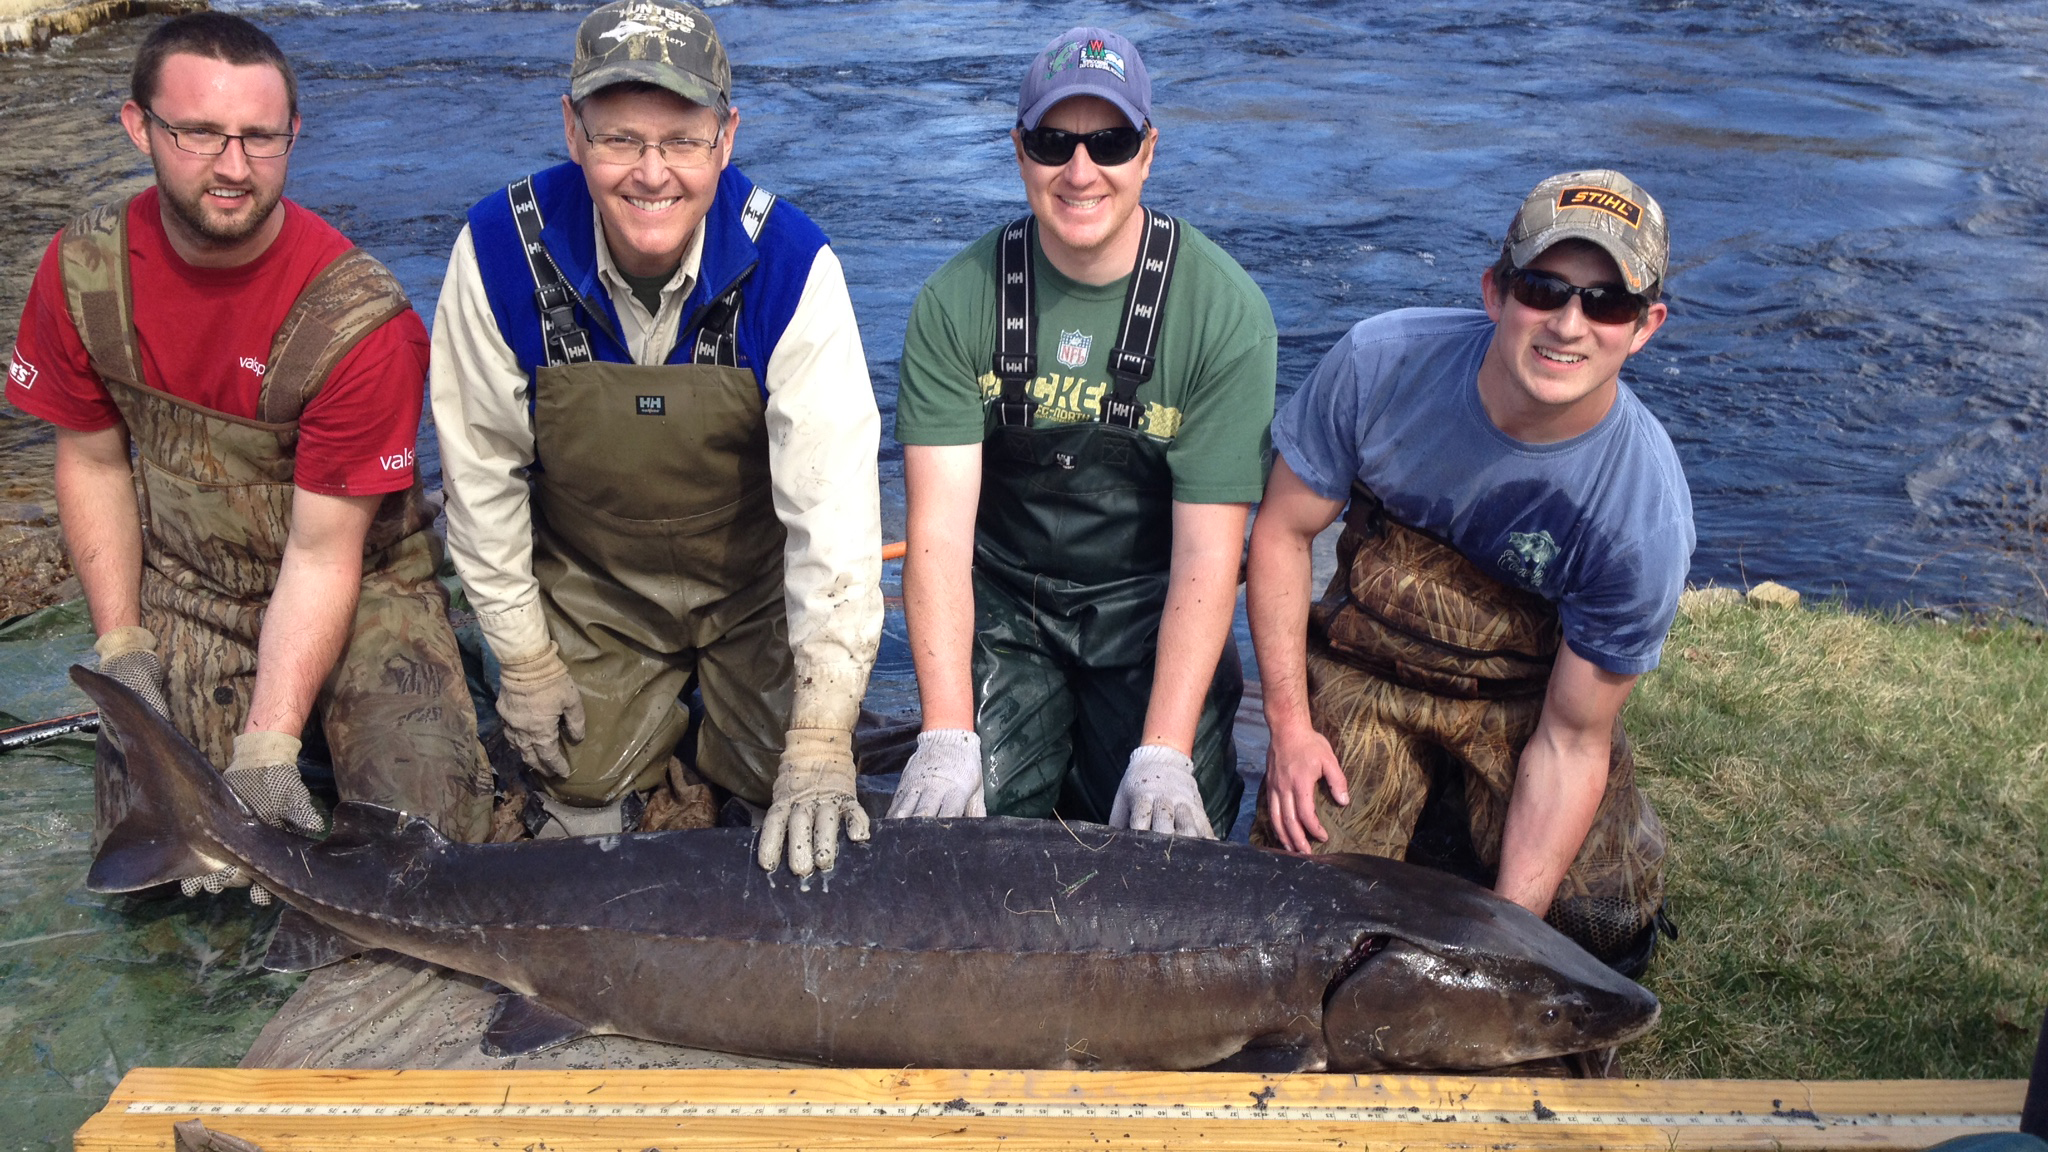 Left and right are two student volunteers from UW Stevens Point. Middle left is Ron Bruch (retired Sturgeon Biologist from Winnebago System), Middle Right is Ryan Koenigs (current Sturgeon Biologist). This is a 77" female lake sturgeon captured below the Shawano Dam on 4-18-2015. Photo courtesy of Wisconsin DNR 